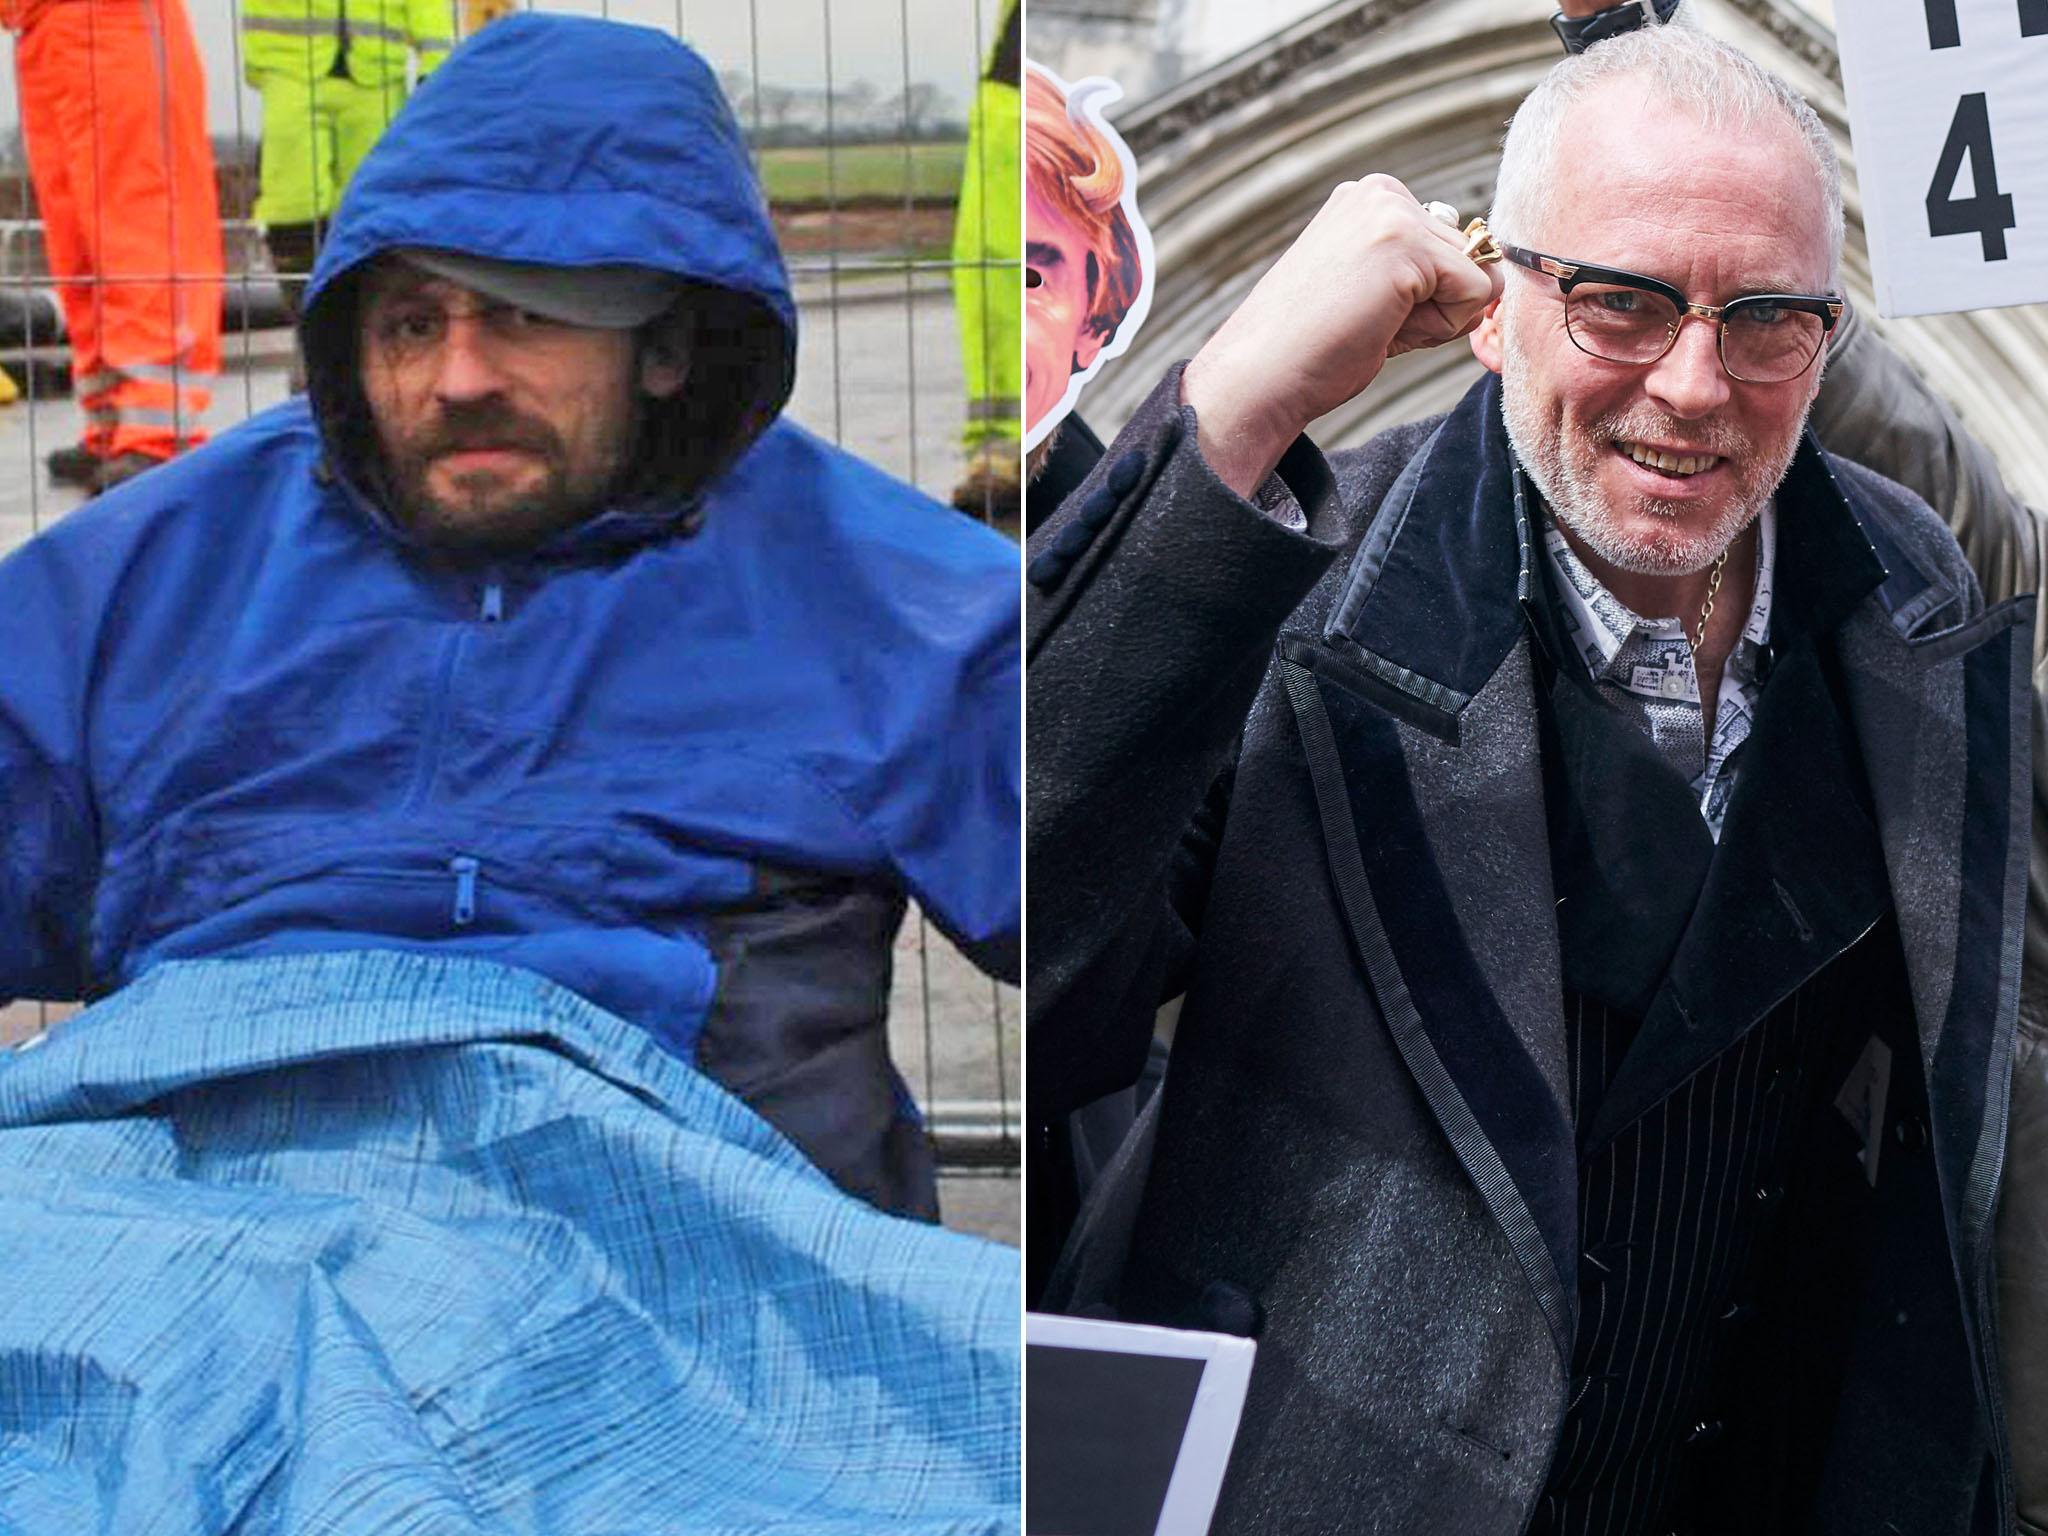 Joe Boyd (left) and Joe Corre (right) appealed an injunction granted to Ineos to prevent protest at its fracking sites